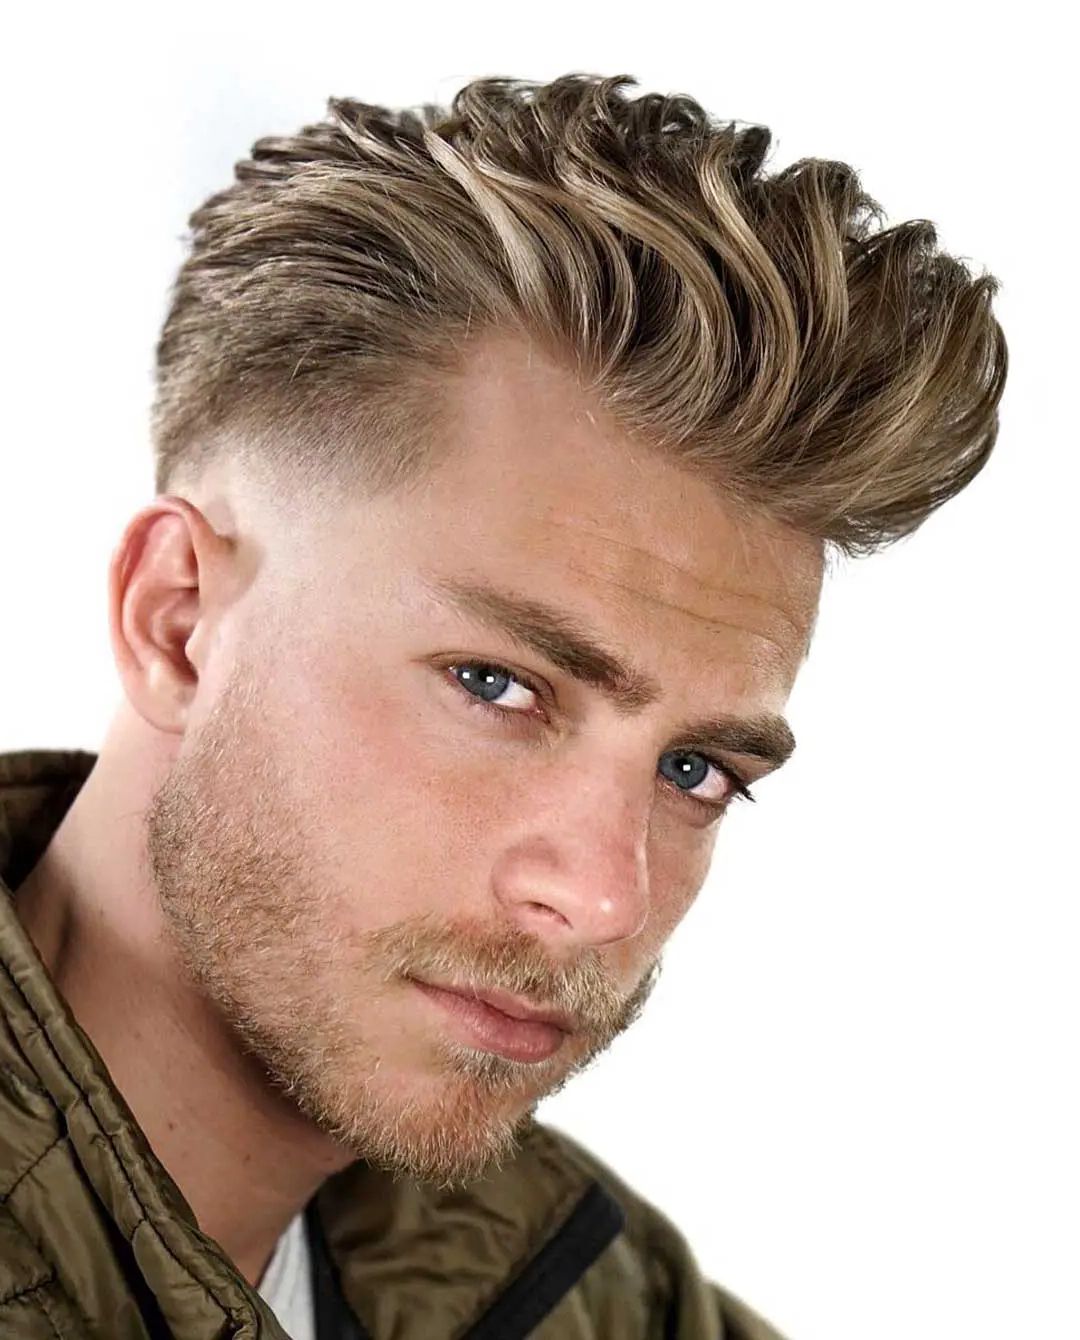 Well Known Textured Haircut With 20+ Textured Haircut Ideas For Men – Men's Hairstyle Tips (Gallery 9 of 20)